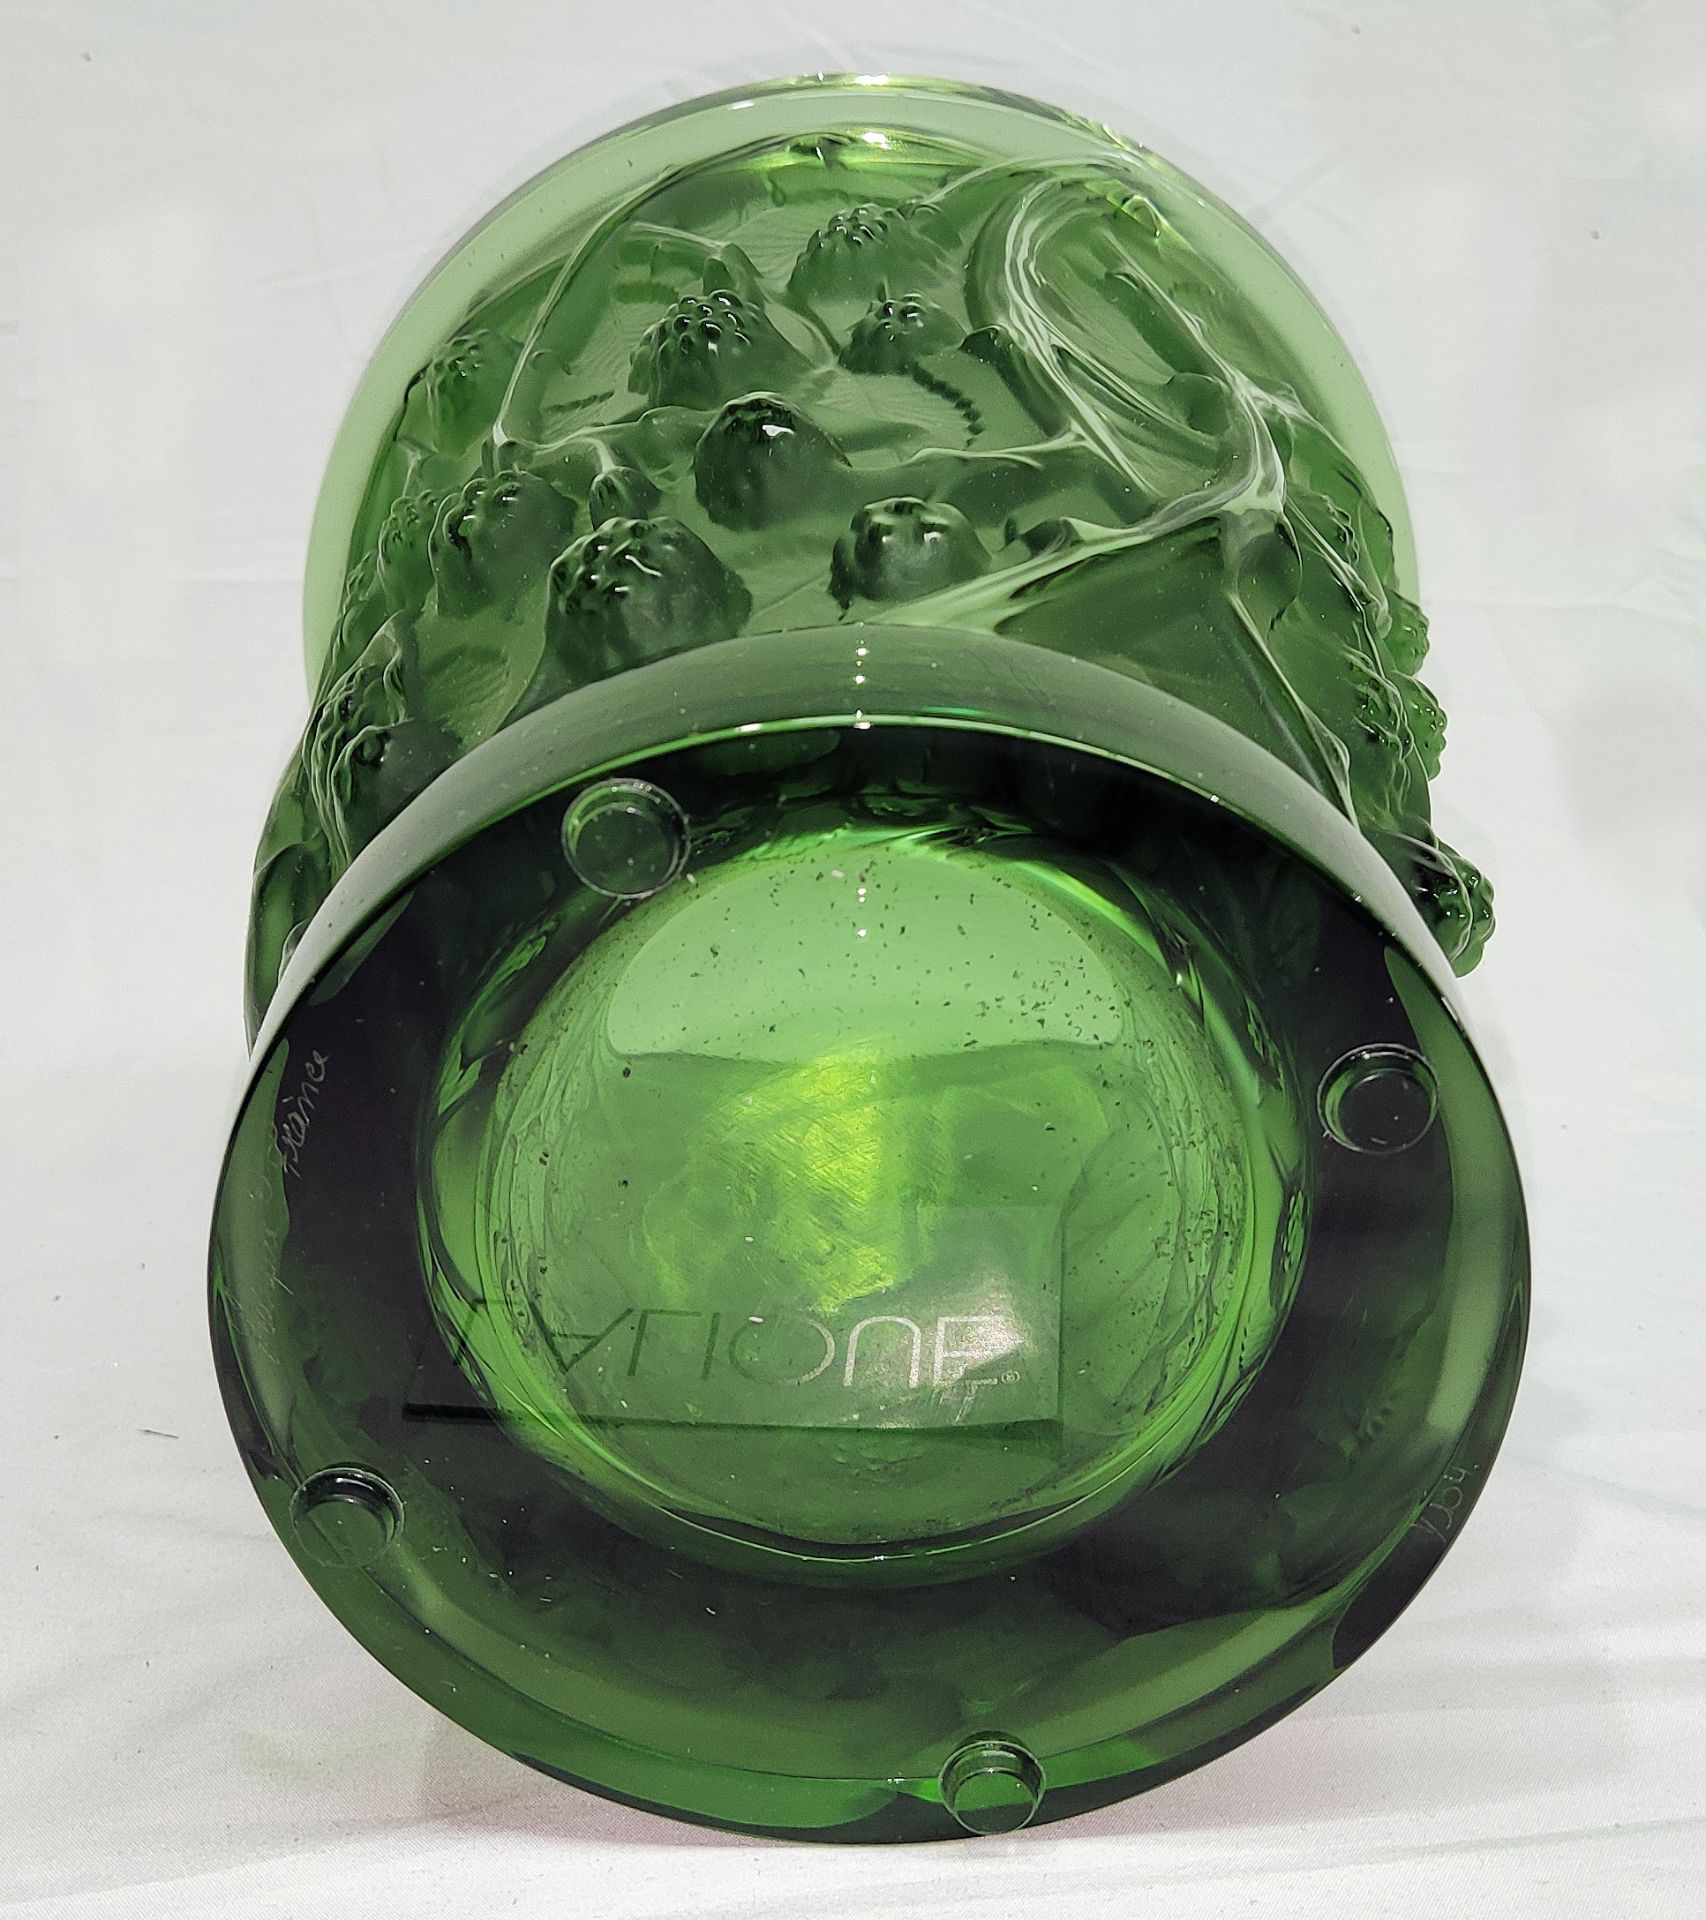 1 x LALIQUE 'Mures' Exquisite Handcrafted French Green Crystal Medium Vase - Original RRP £2,690 - Image 15 of 23